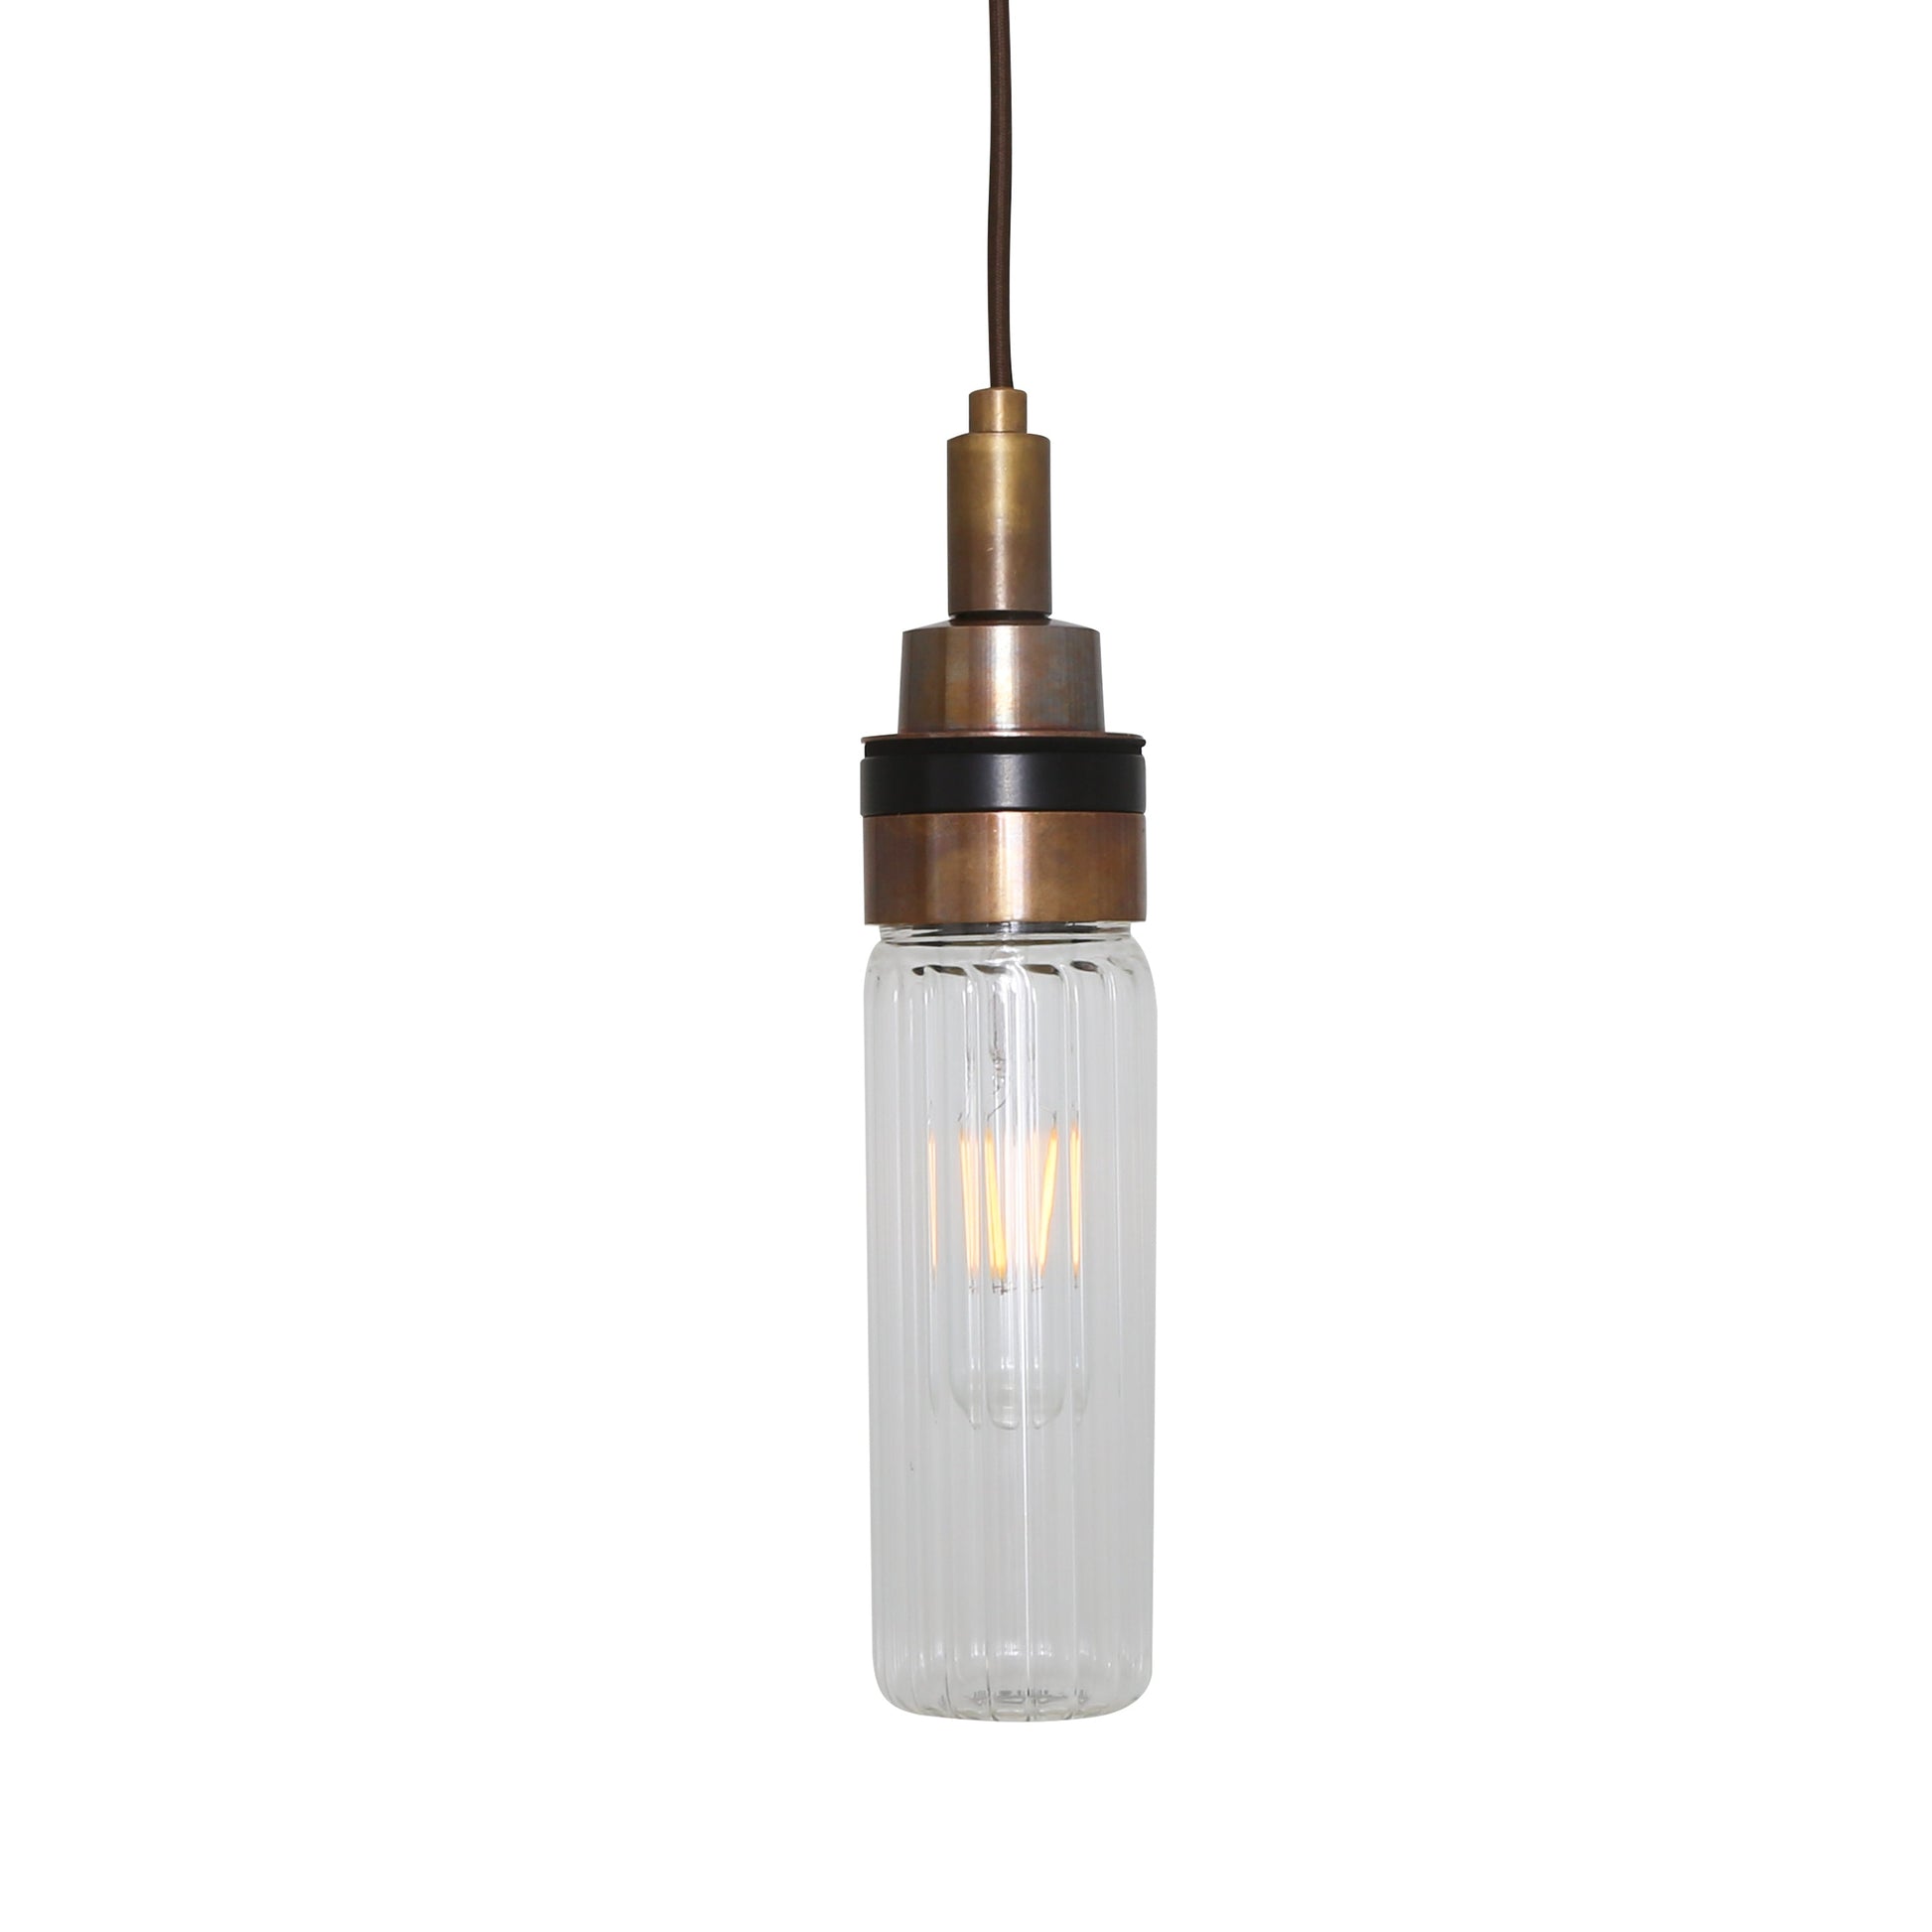 Delta Tube Glass and Brass Bathroom Pendant IP65 Product Shot